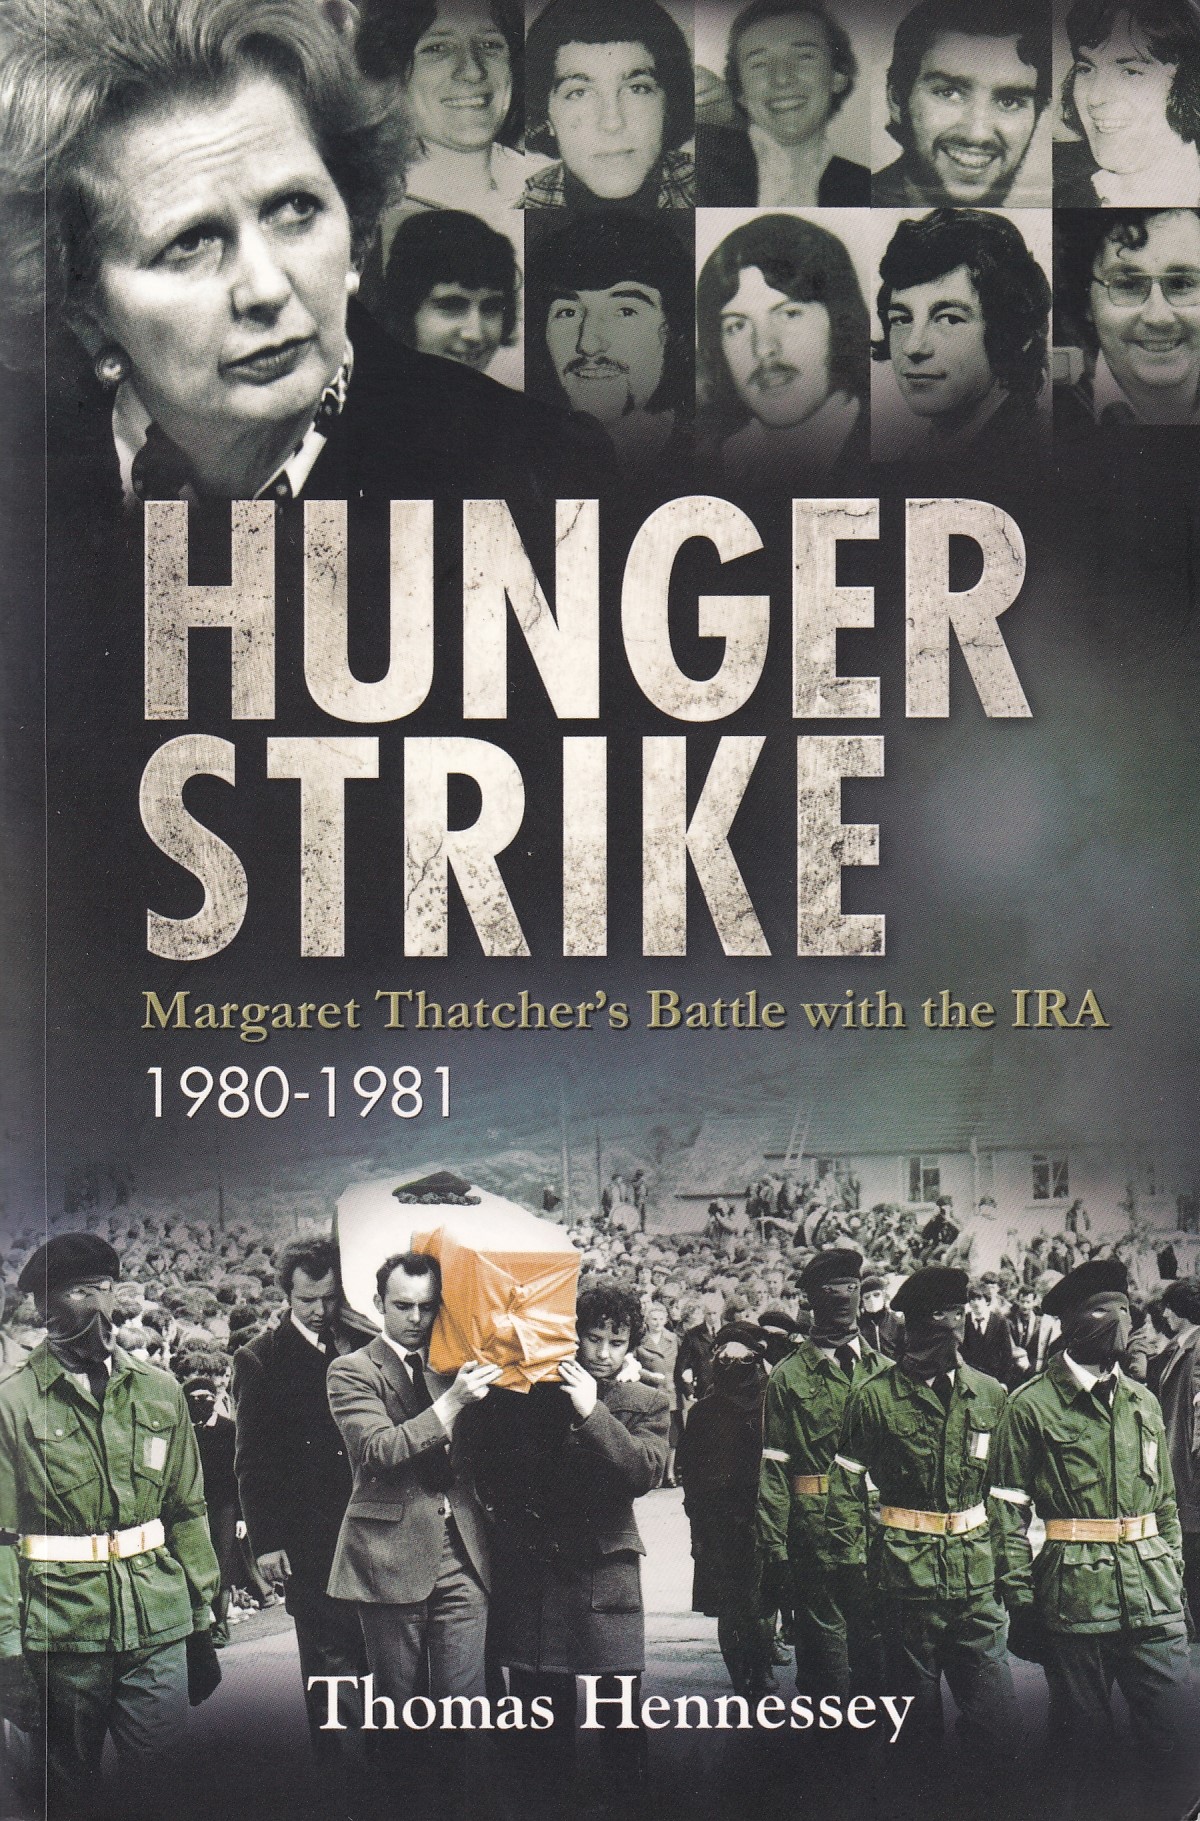 Hunger Strike: Margaret Thatcher’s Battle with the IRA 1980-1981 by Thomas Hennessey